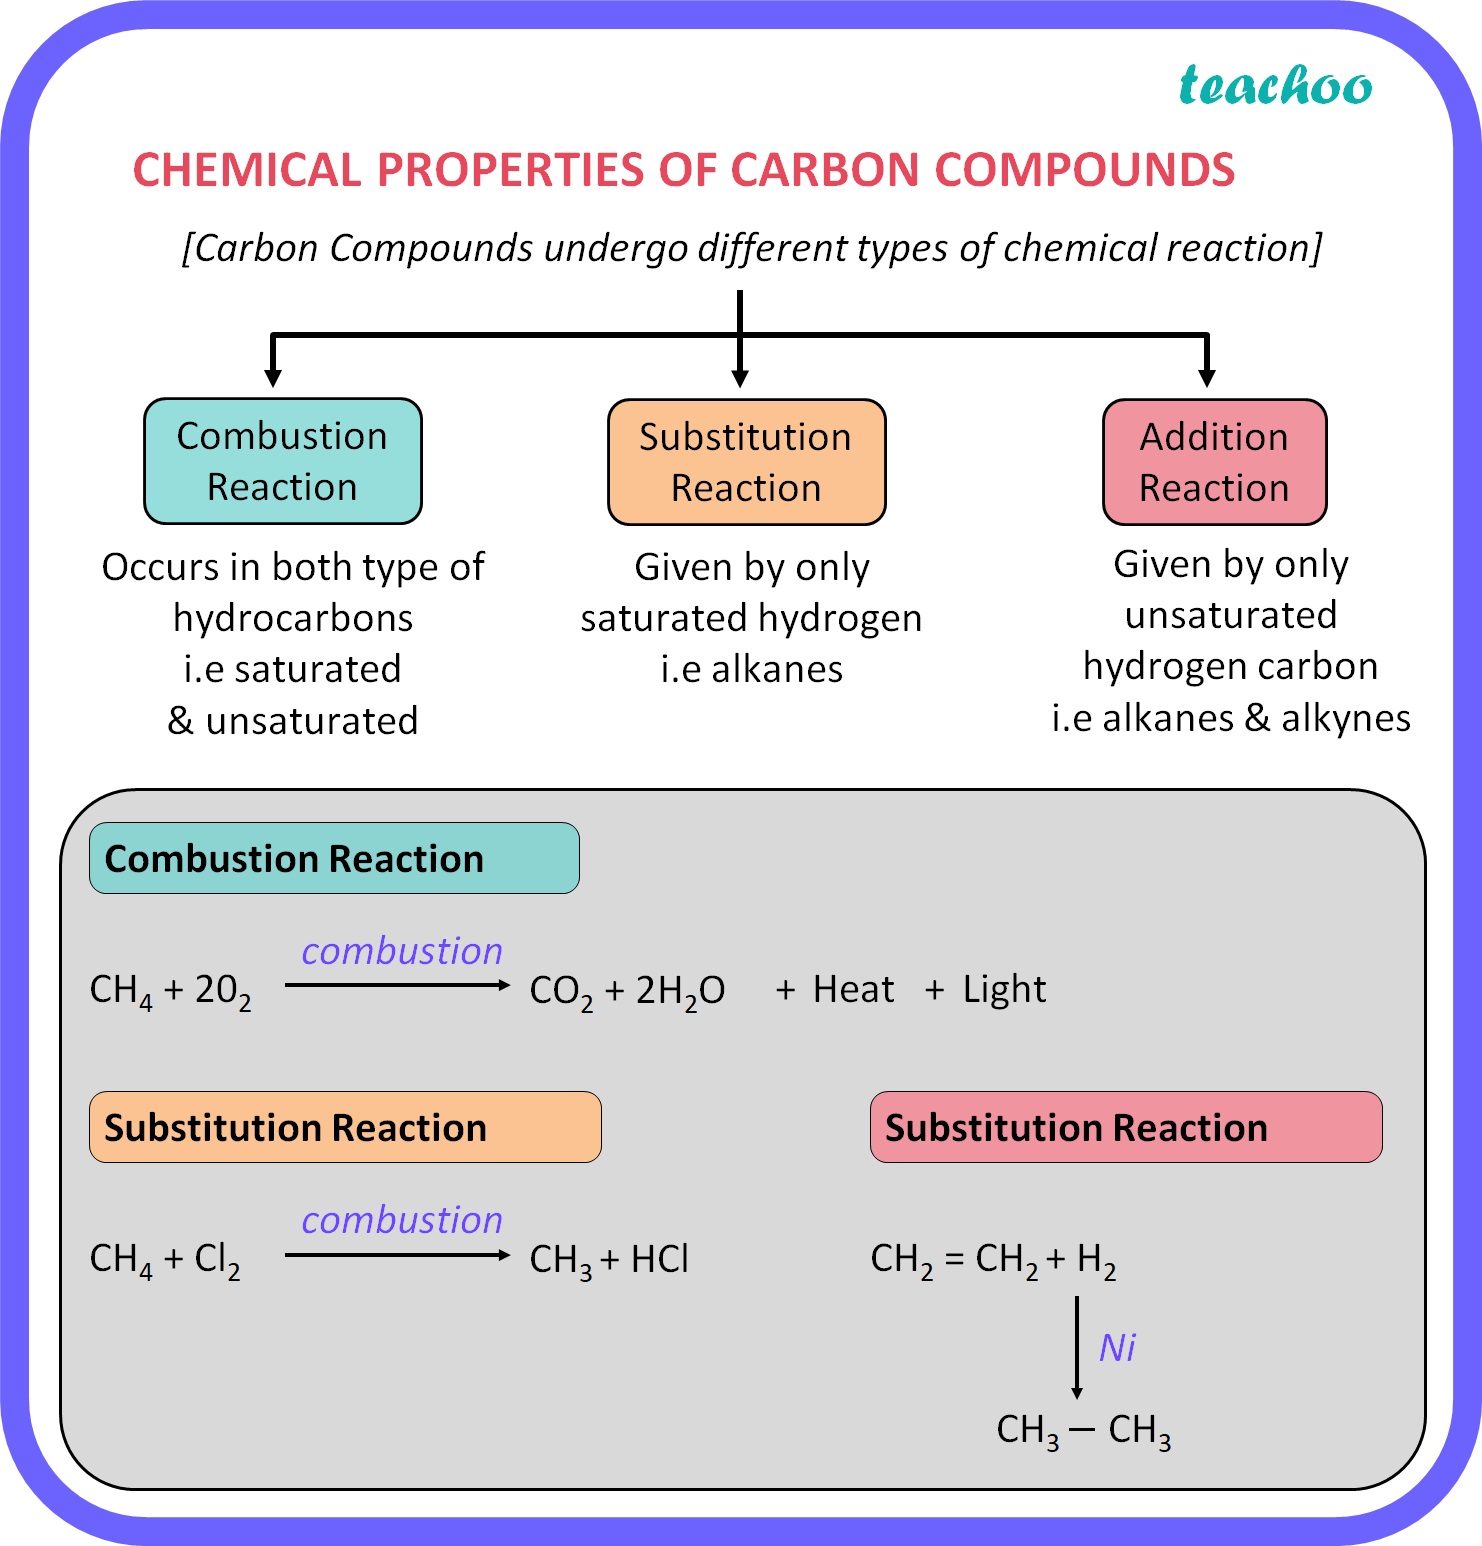 CHEMICAL PROPERTIES OF CARBON COMPOUNDS - Teachoo.jpg